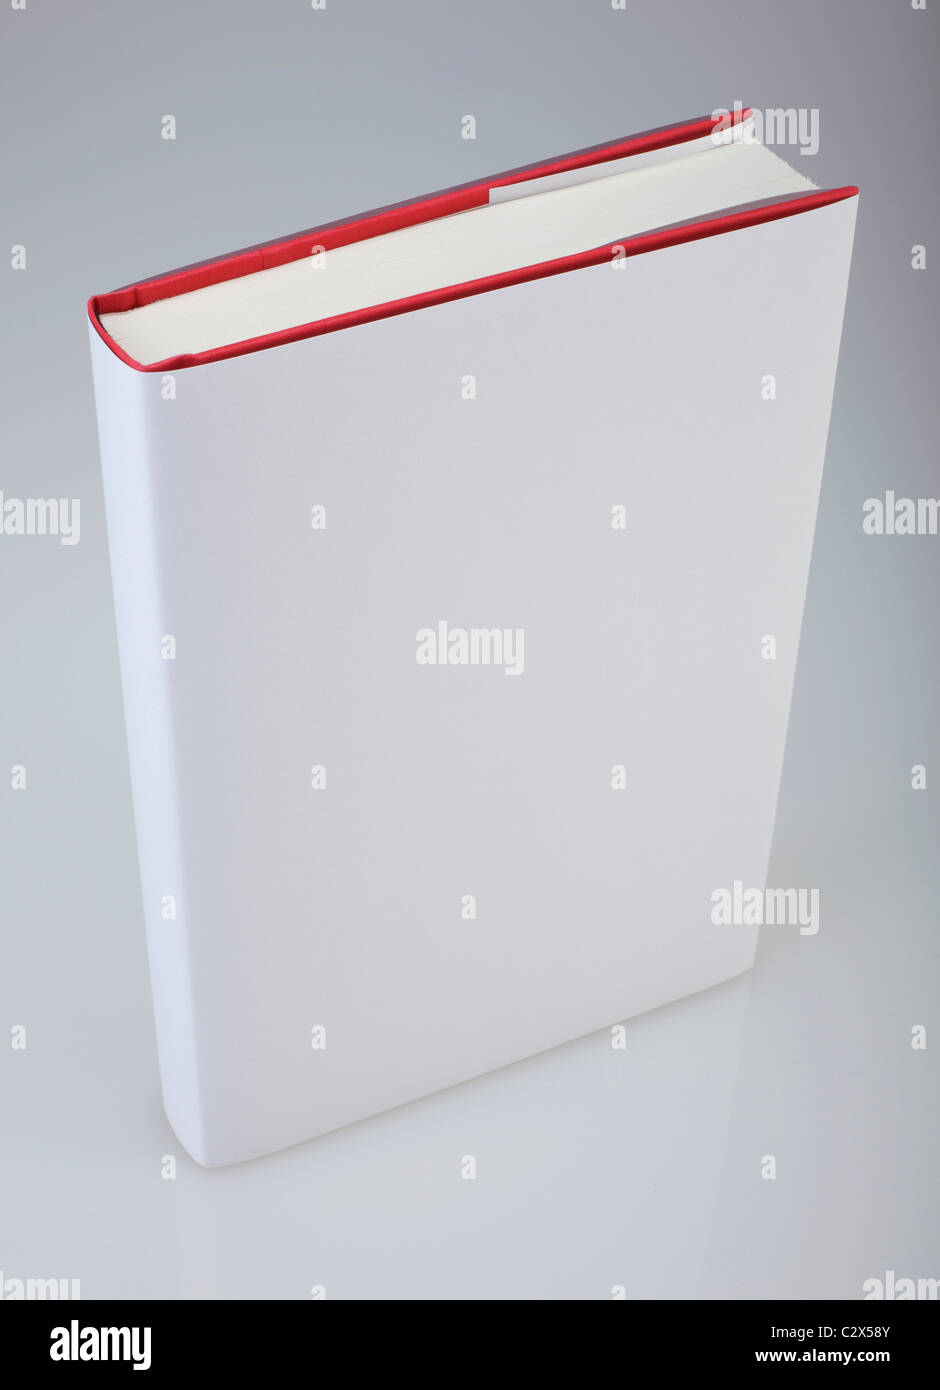 Hardcover book with plain, white cover for design layout Stock Photo